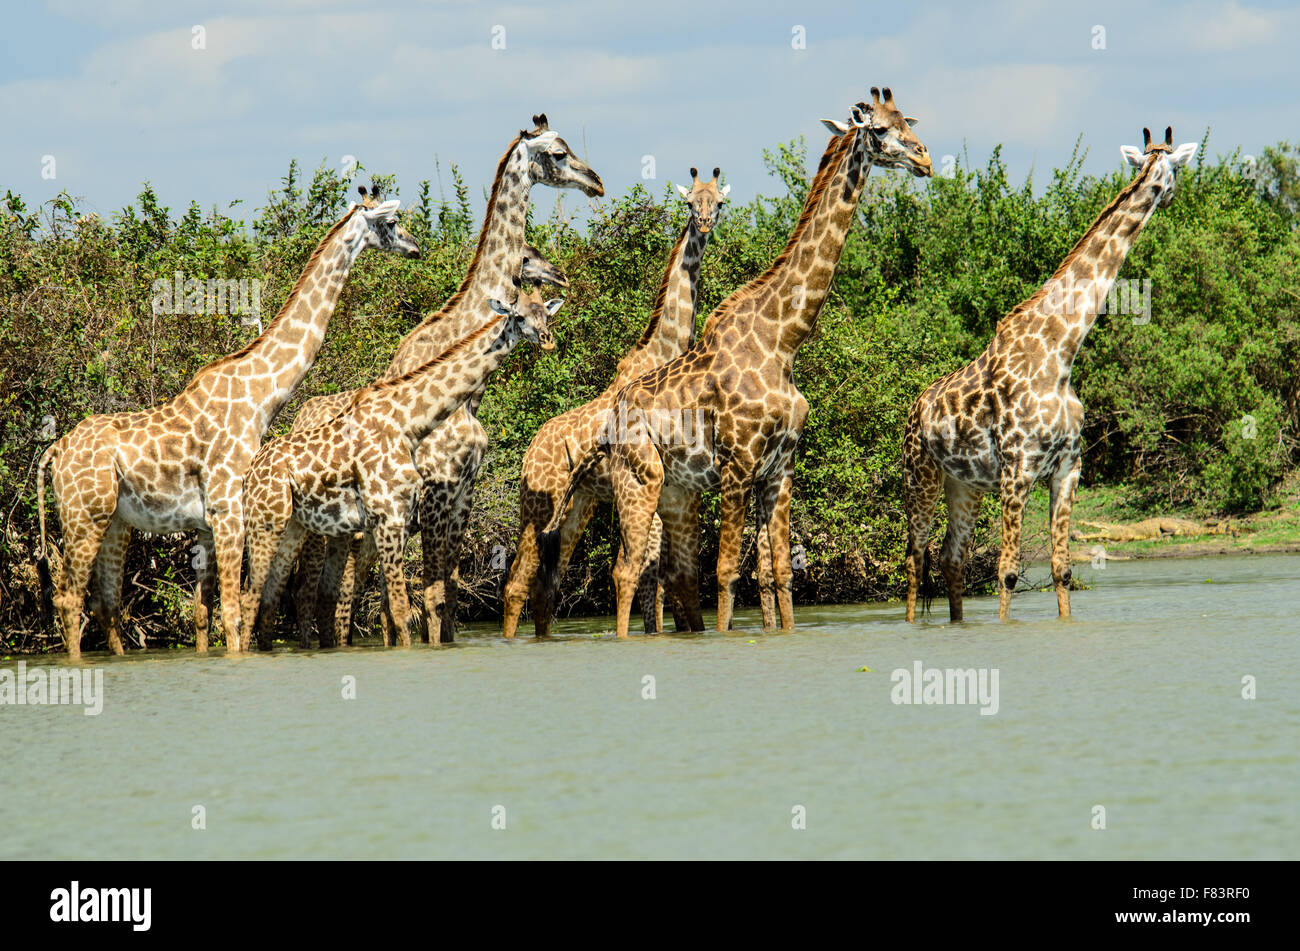 A  wary Tower of giraffes fearful of crossing the river Stock Photo